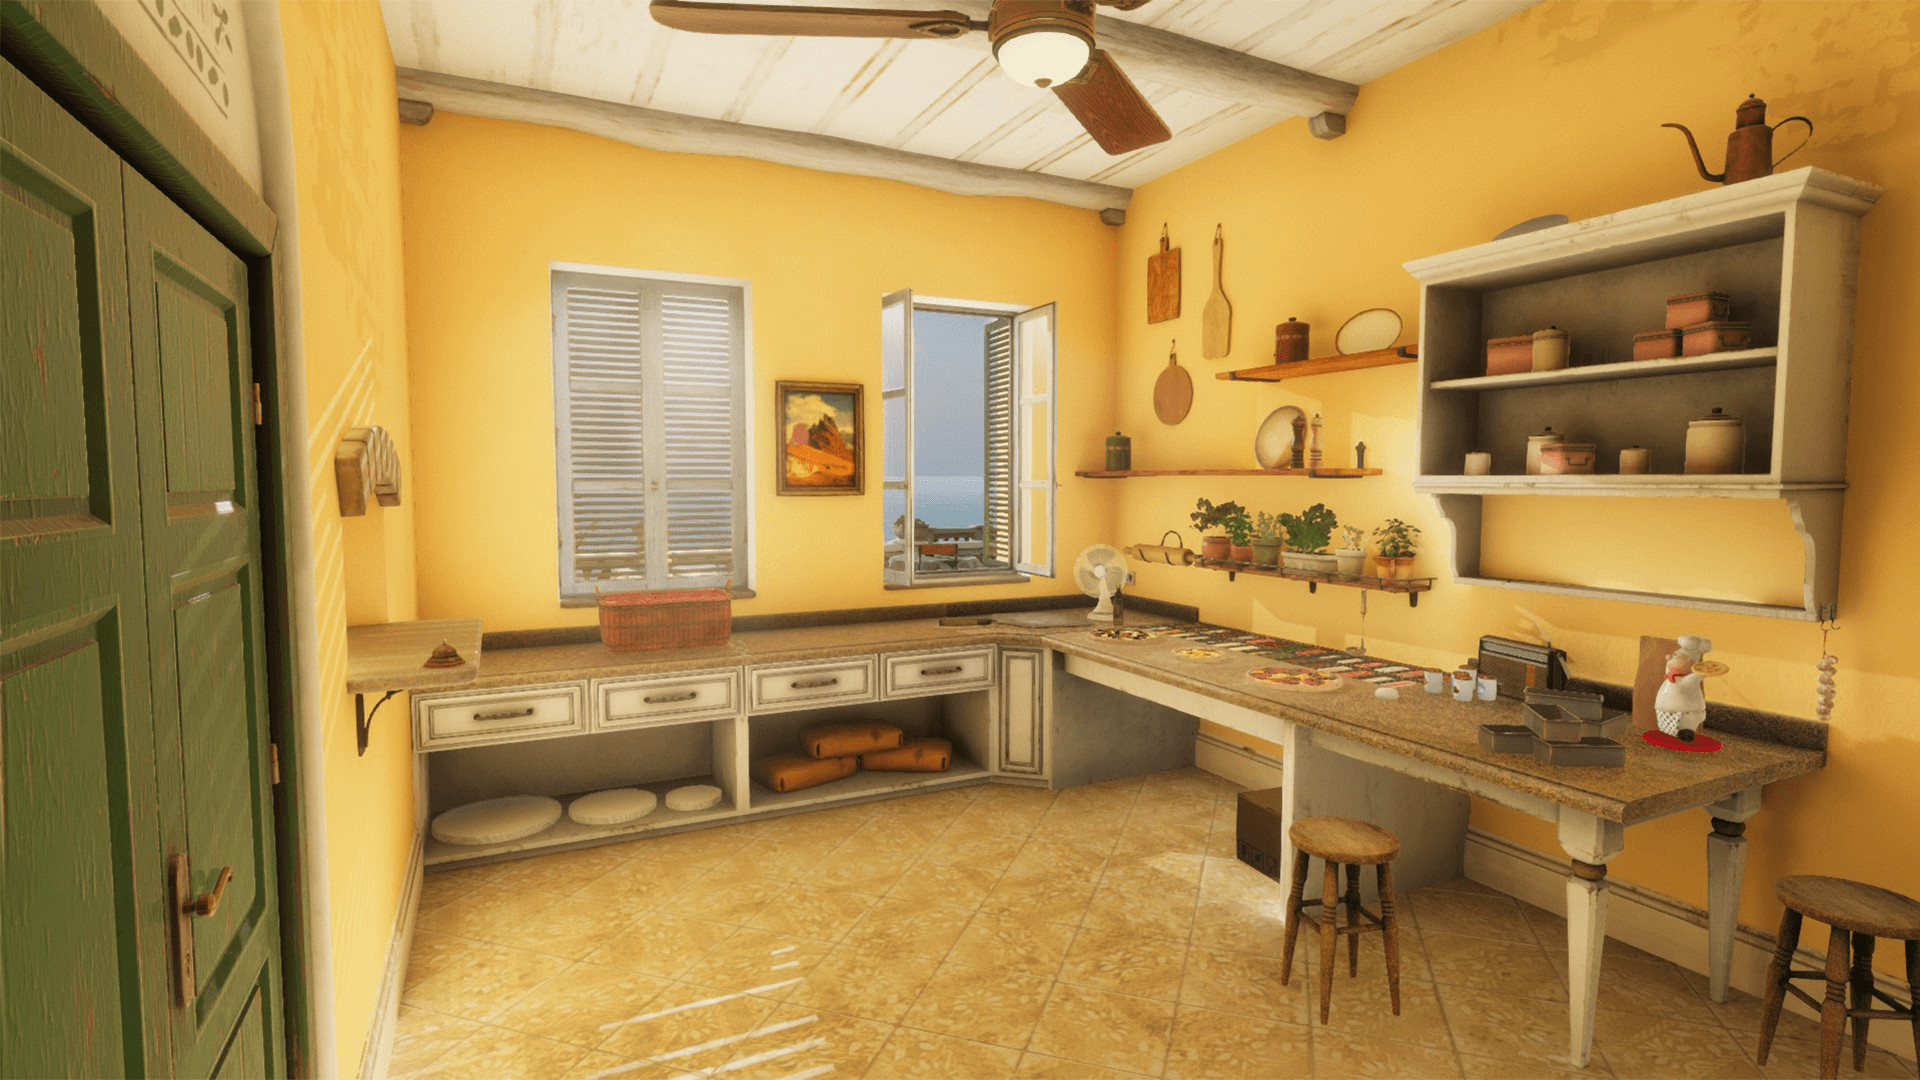 Cooking Simulator - Pizza is now - Cooking Simulator